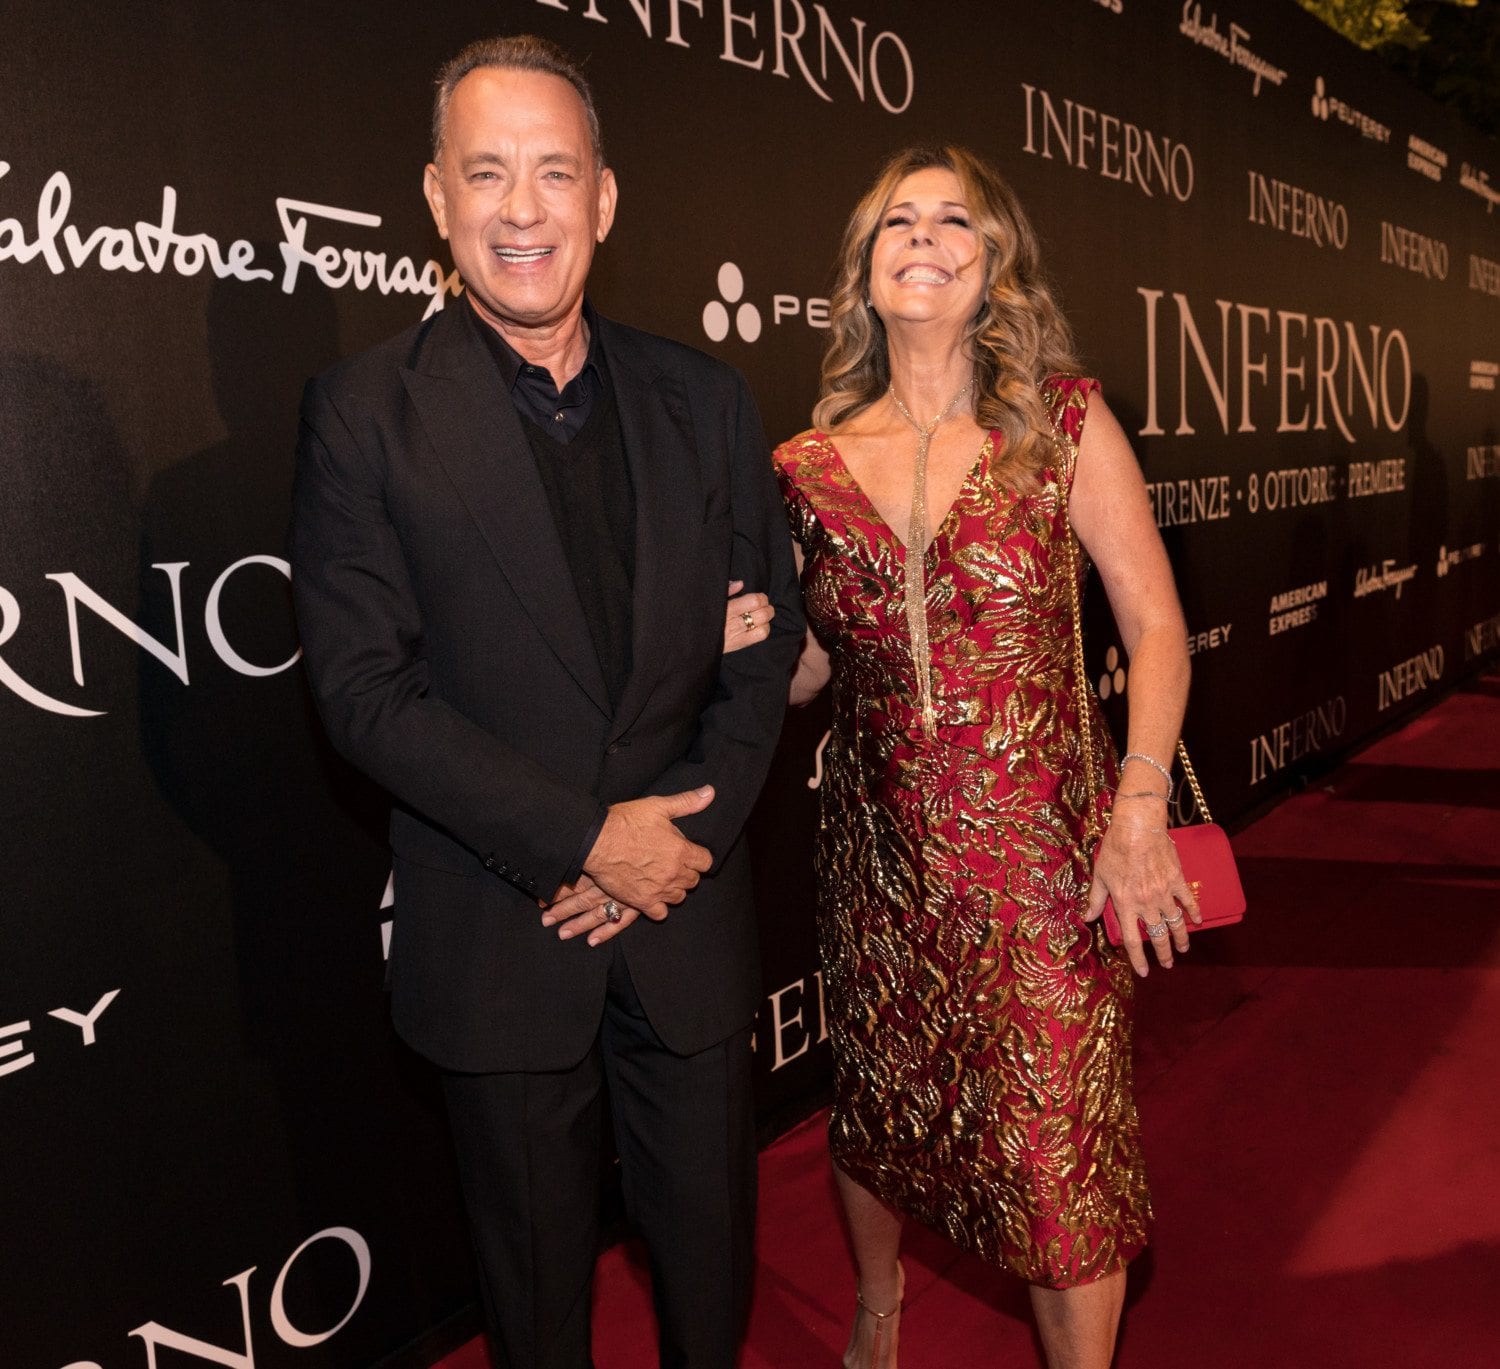 FLORENCE, ITALY - OCTOBER 08: (L-R) Tom Hanks and Rita Wilson attend the INFERNO World Premiere Red Carpet at the Opera di Firenze on October 8, 2016 in Florence, Italy. (Photo by Christopher Polk/Getty Images for Sony Pictures Entertainment)